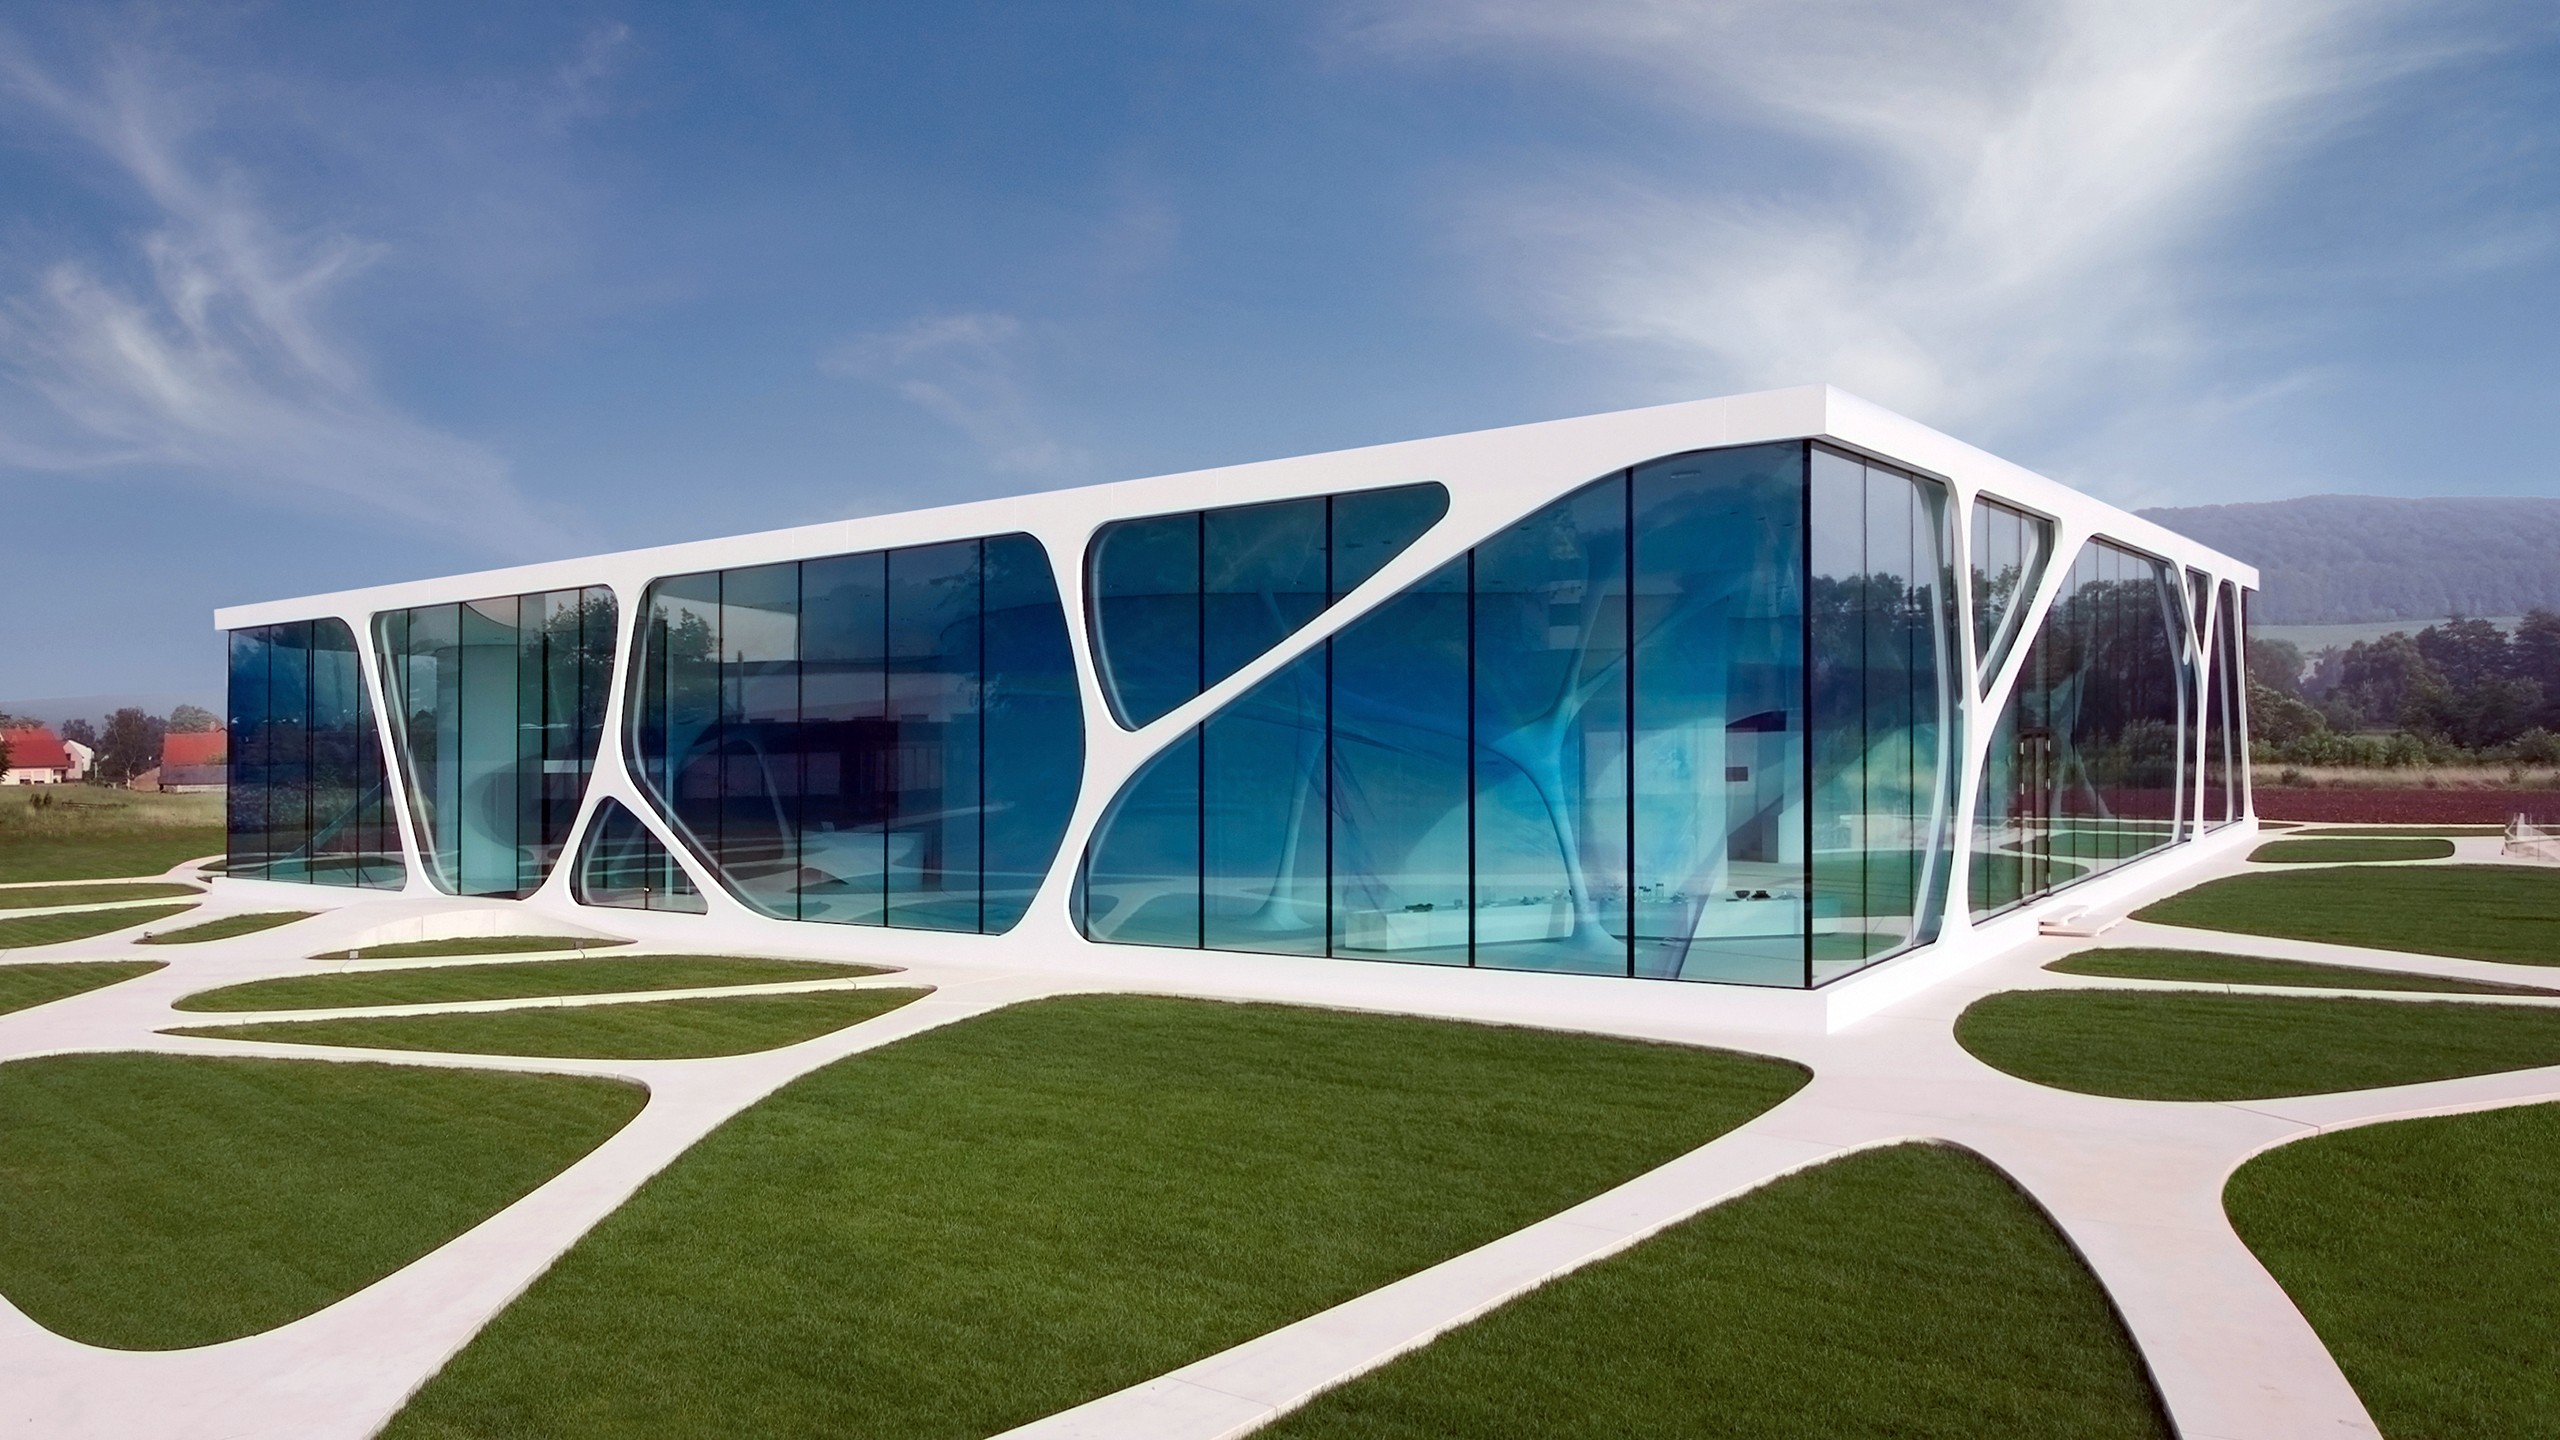 General 2560x1440 architecture Germany building modern reflection glass grass path Europe